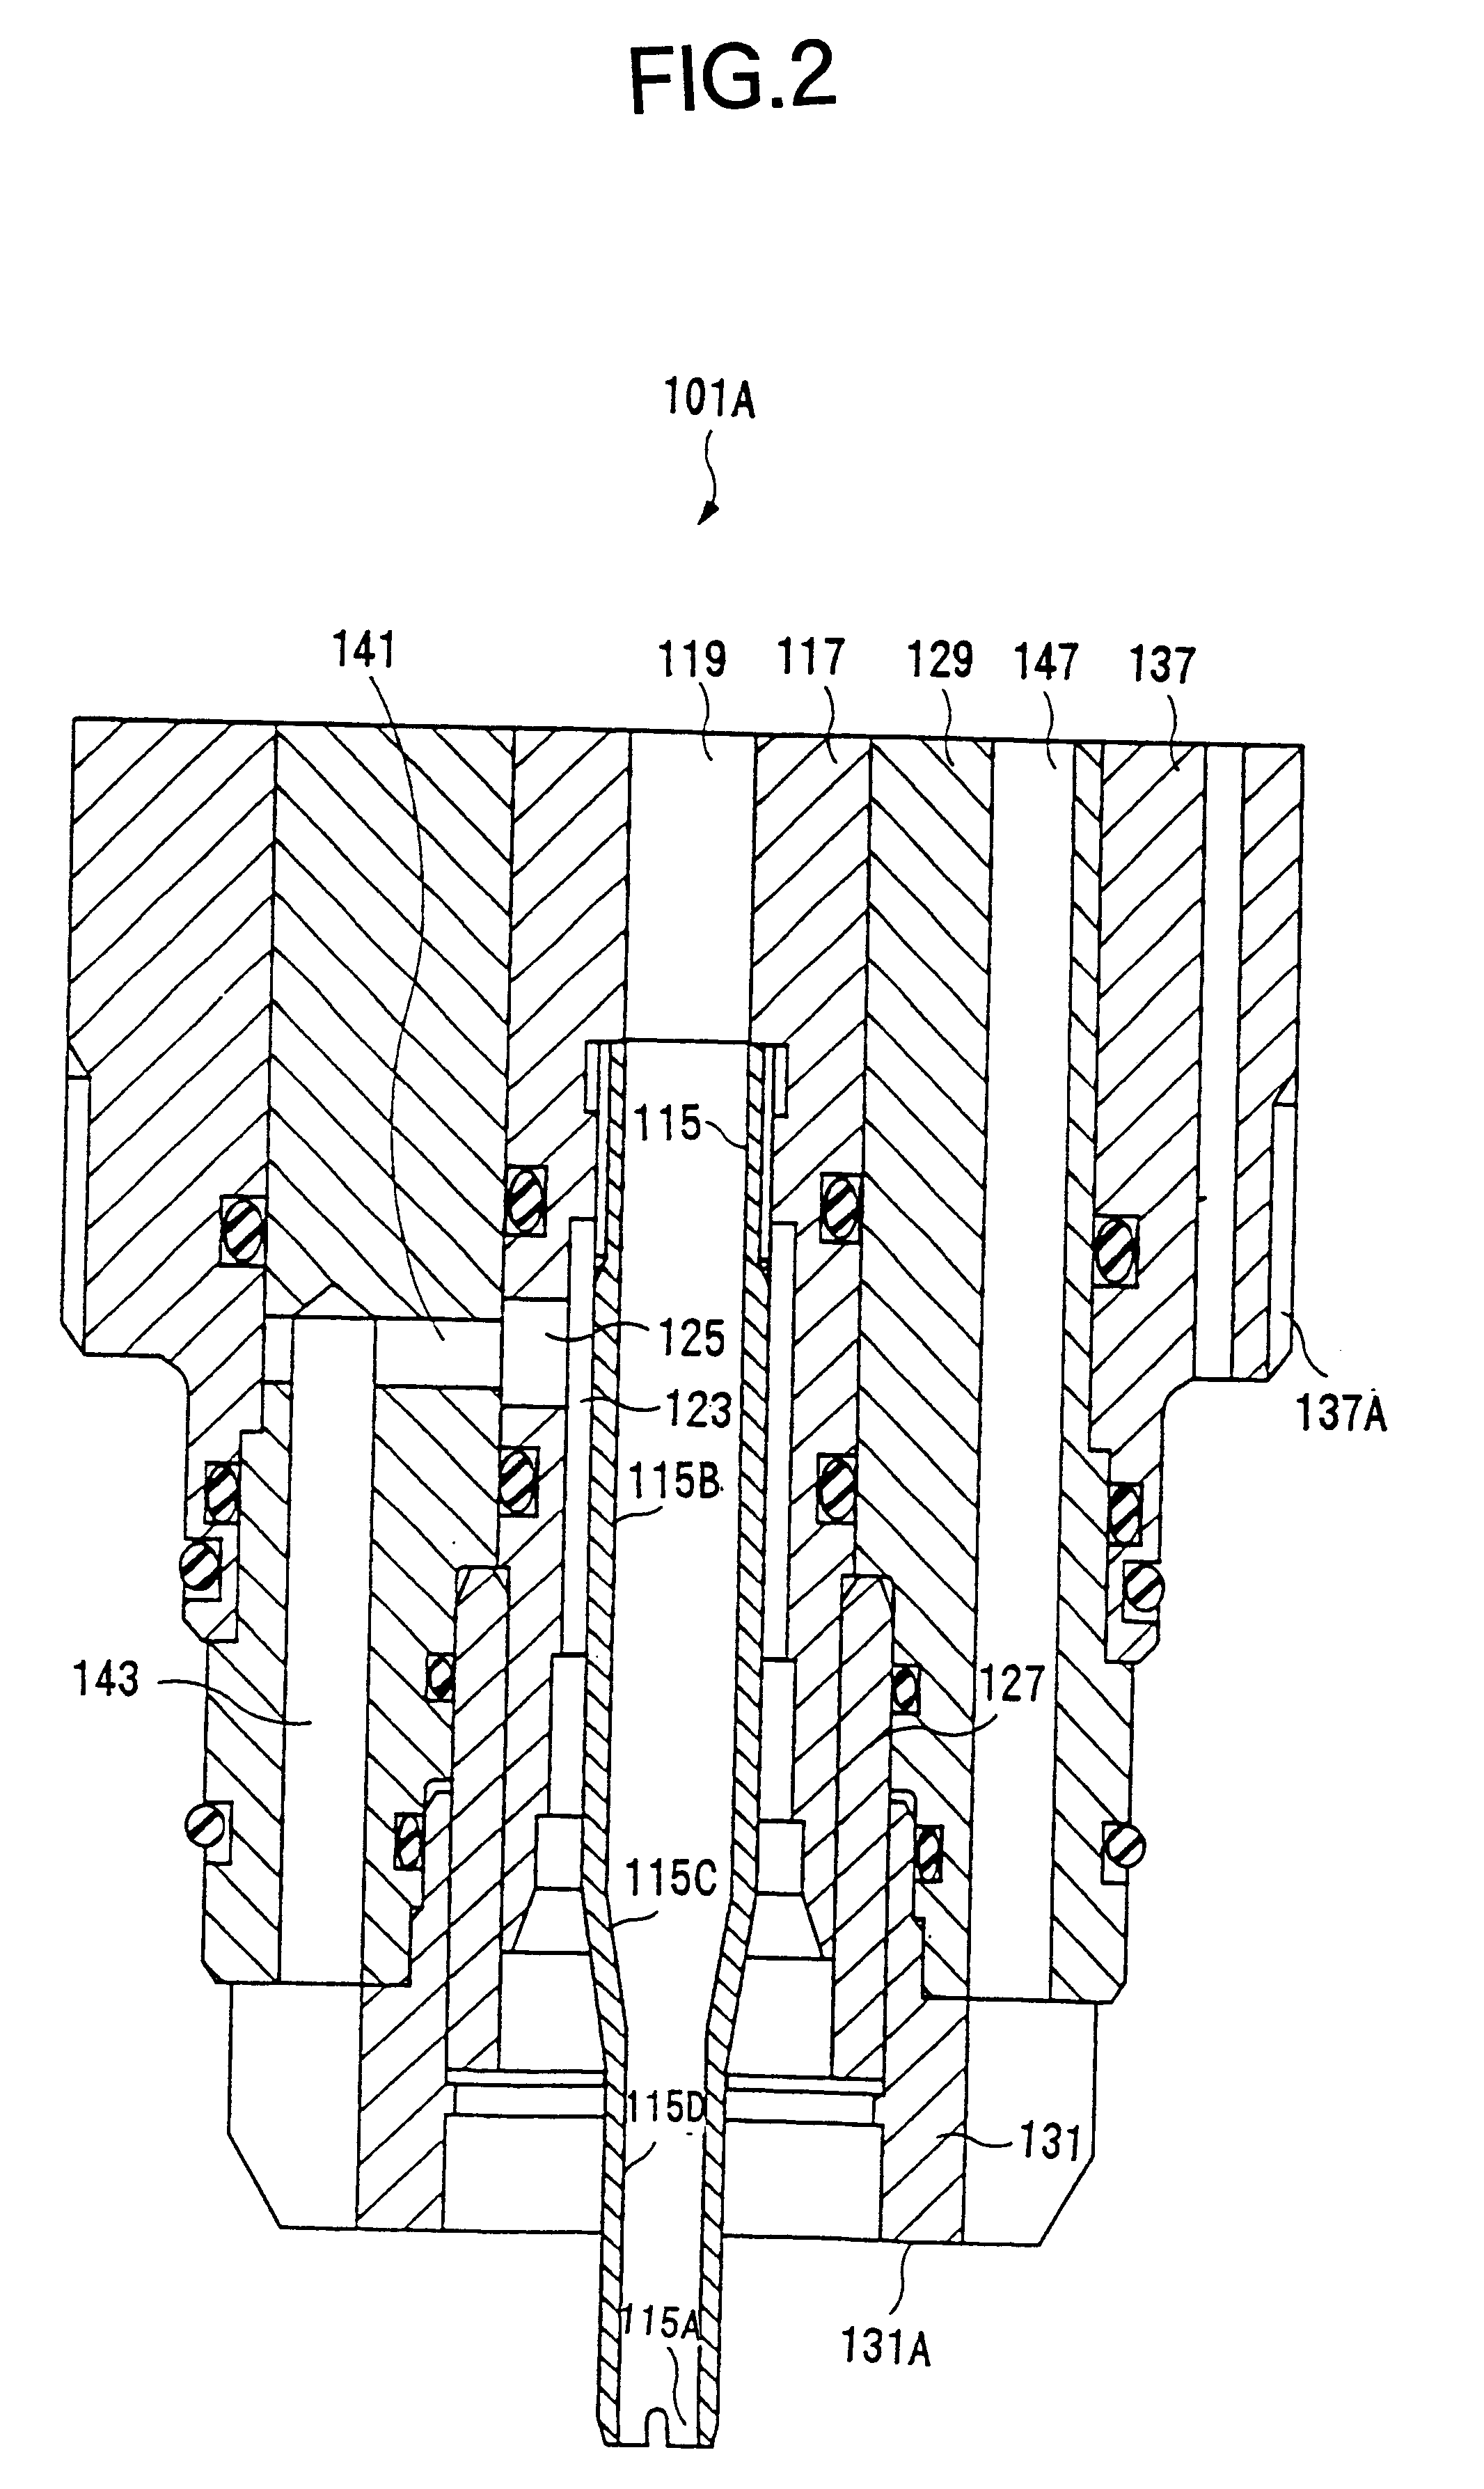 Plasma processing device, plasma torch and method for replacing components of same